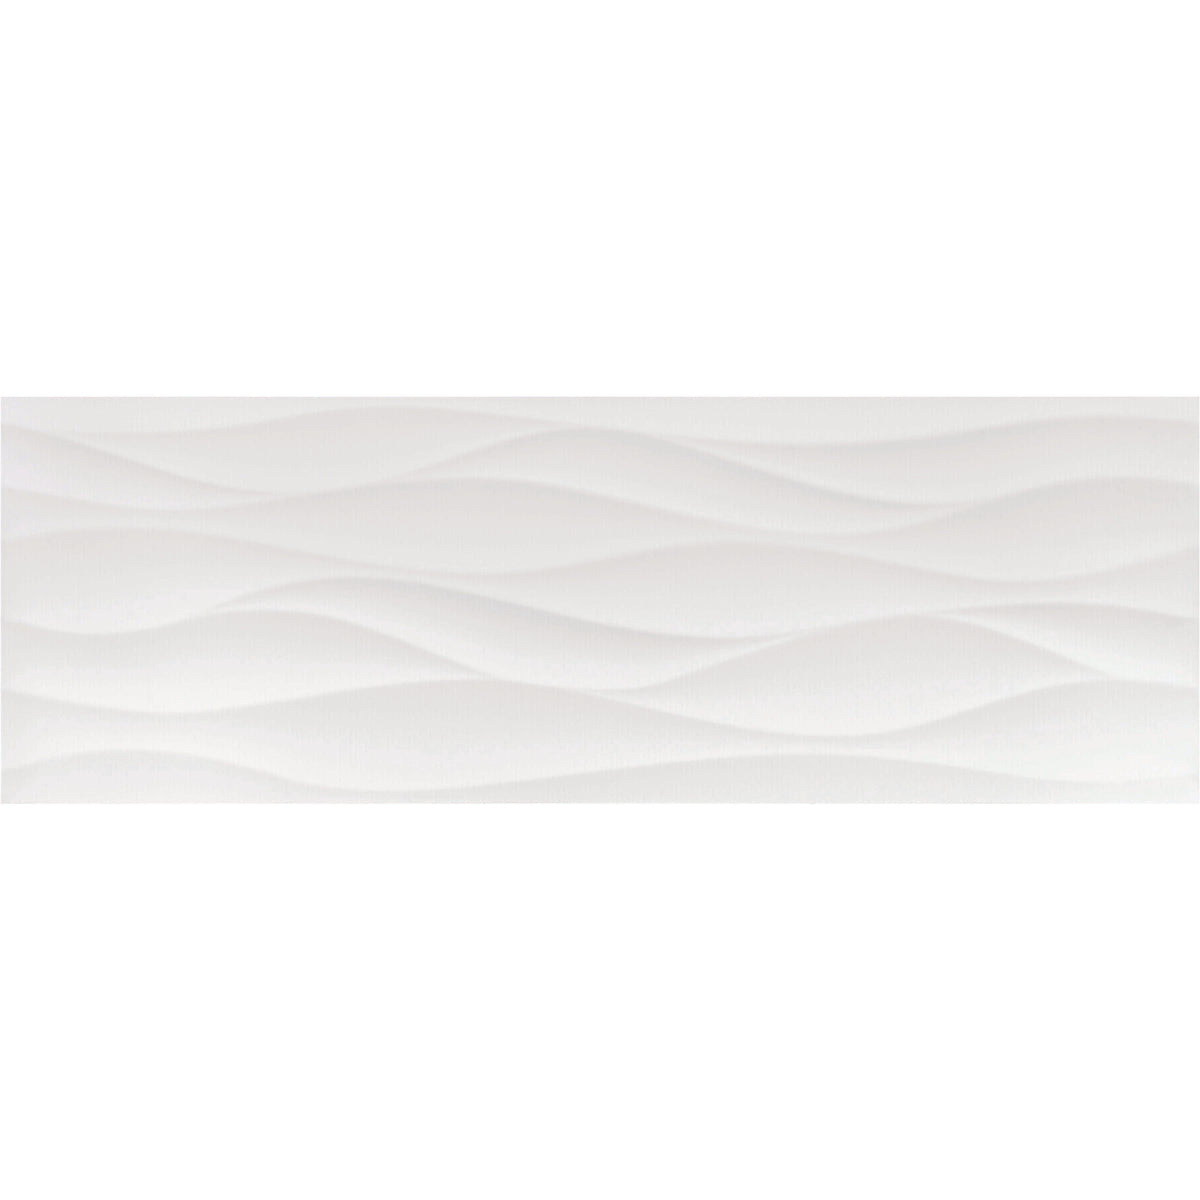 Daltile - Aesthetic - 12 in. x 36 in. Glazed Ceramic Wall Tile - Frequency